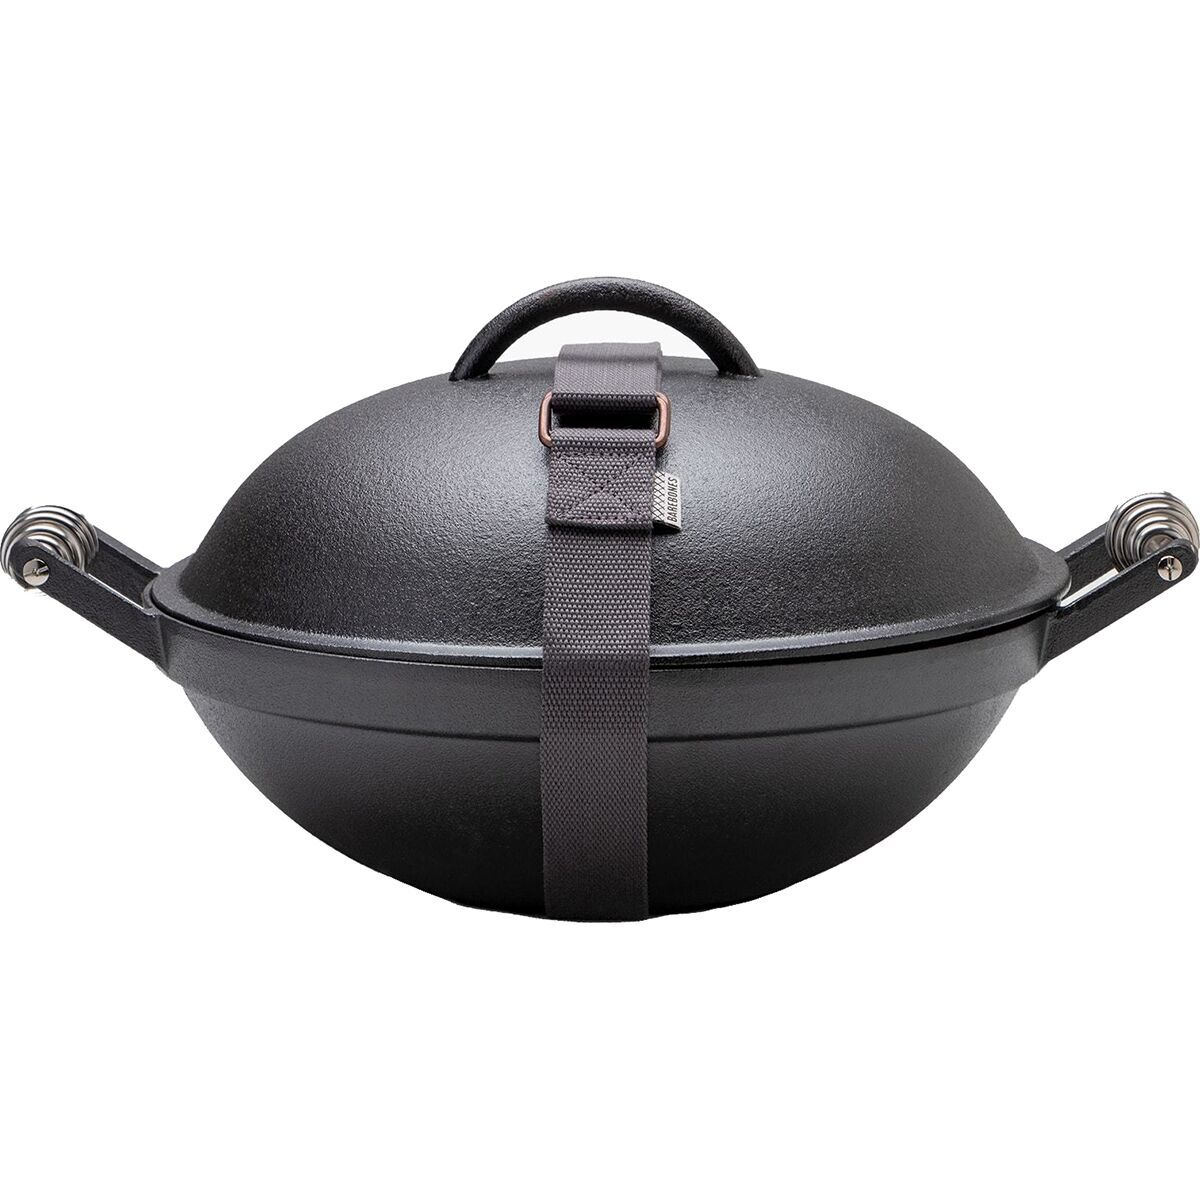 Backcountry Cast Iron Skillet - household items - by owner